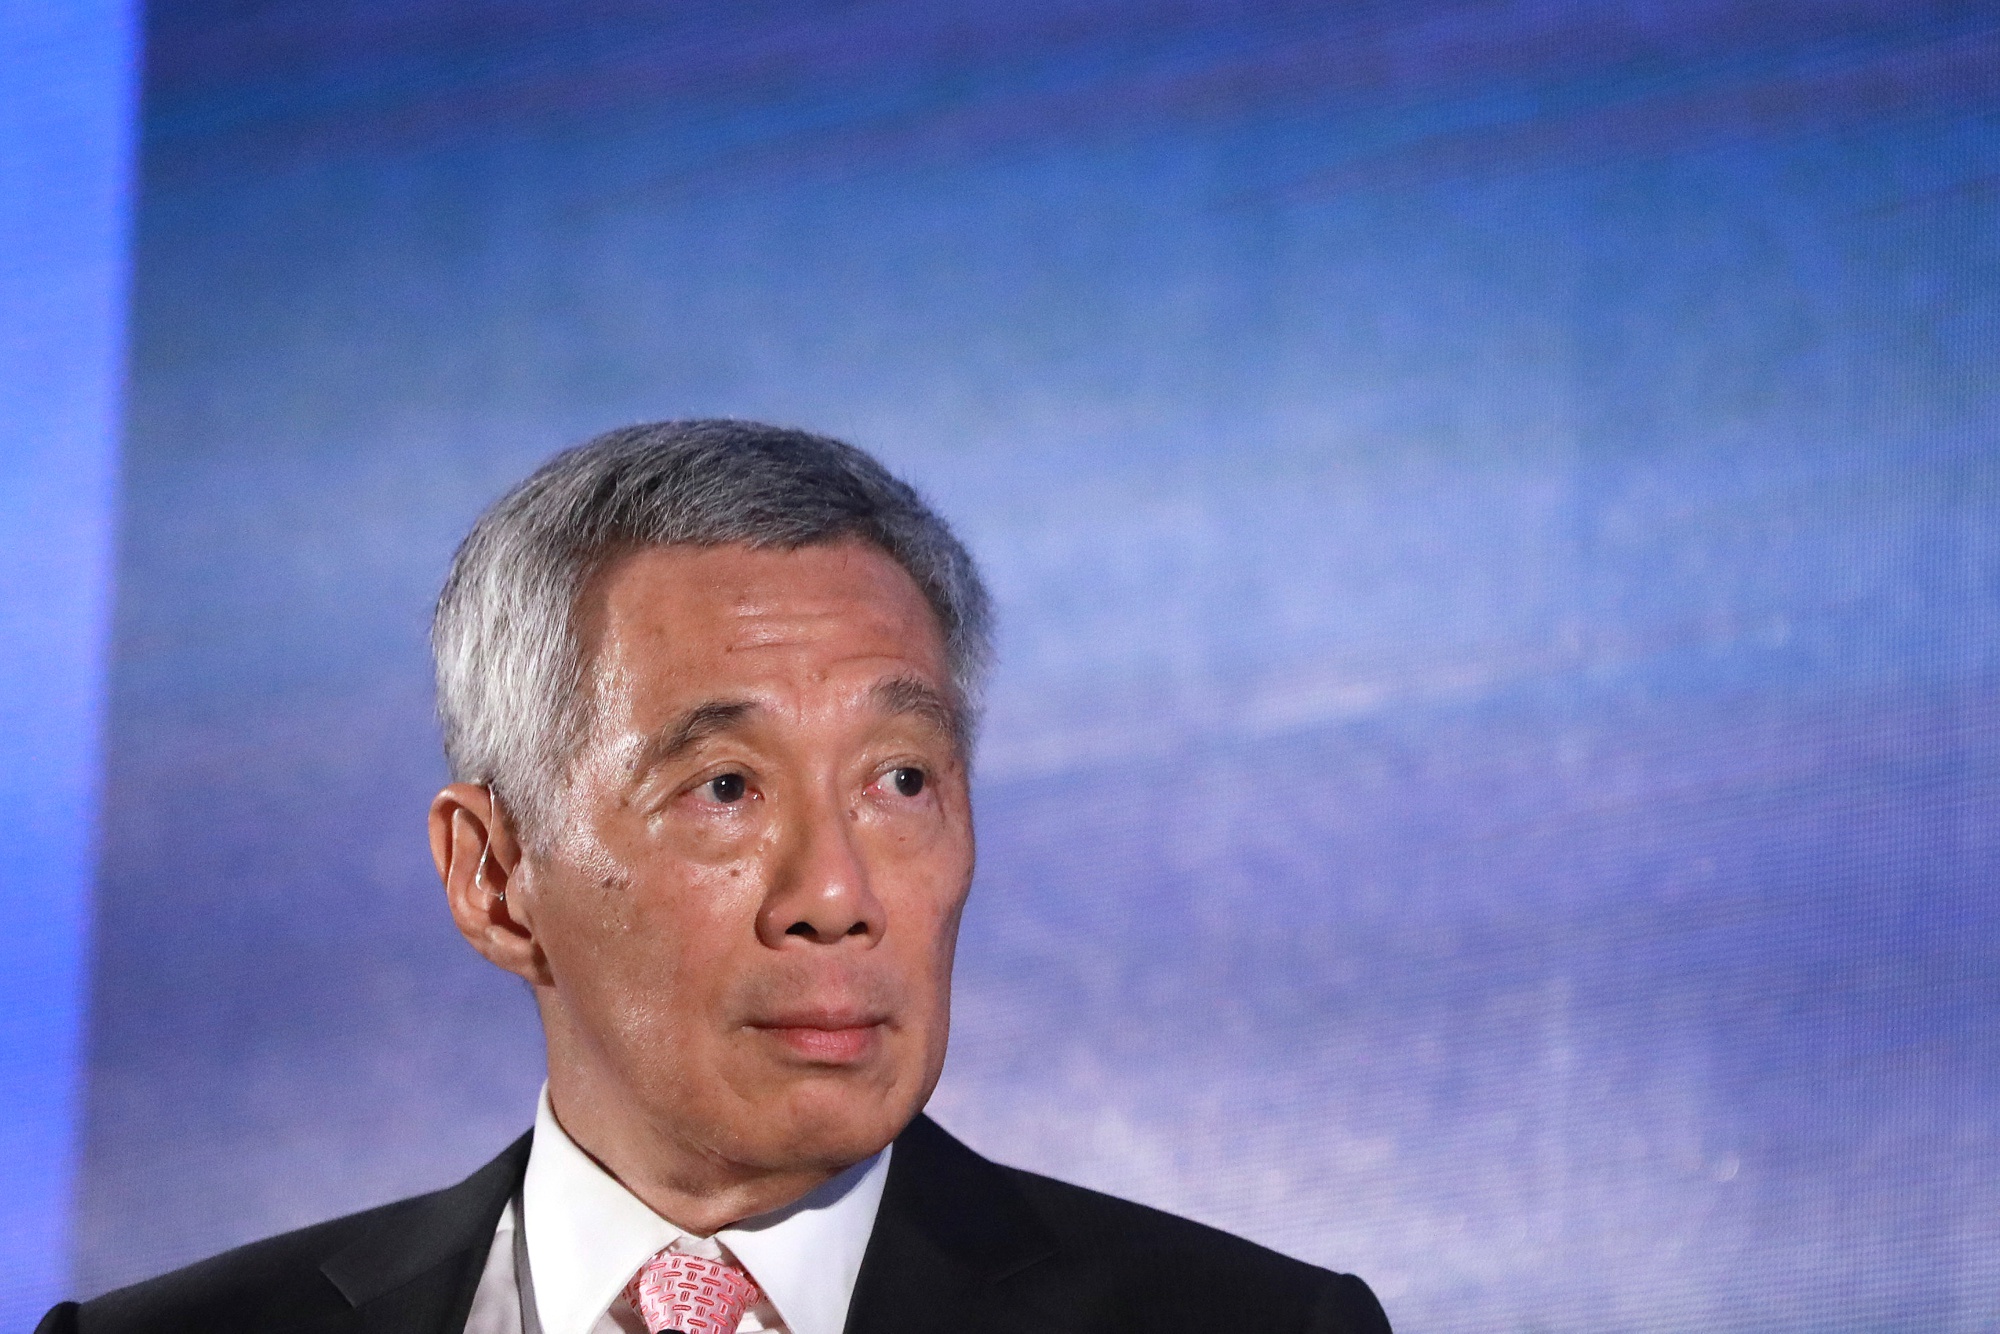 Singapore’s Lee Warns Nation is Facing ‘Very Grave Situation’ - Bloomberg